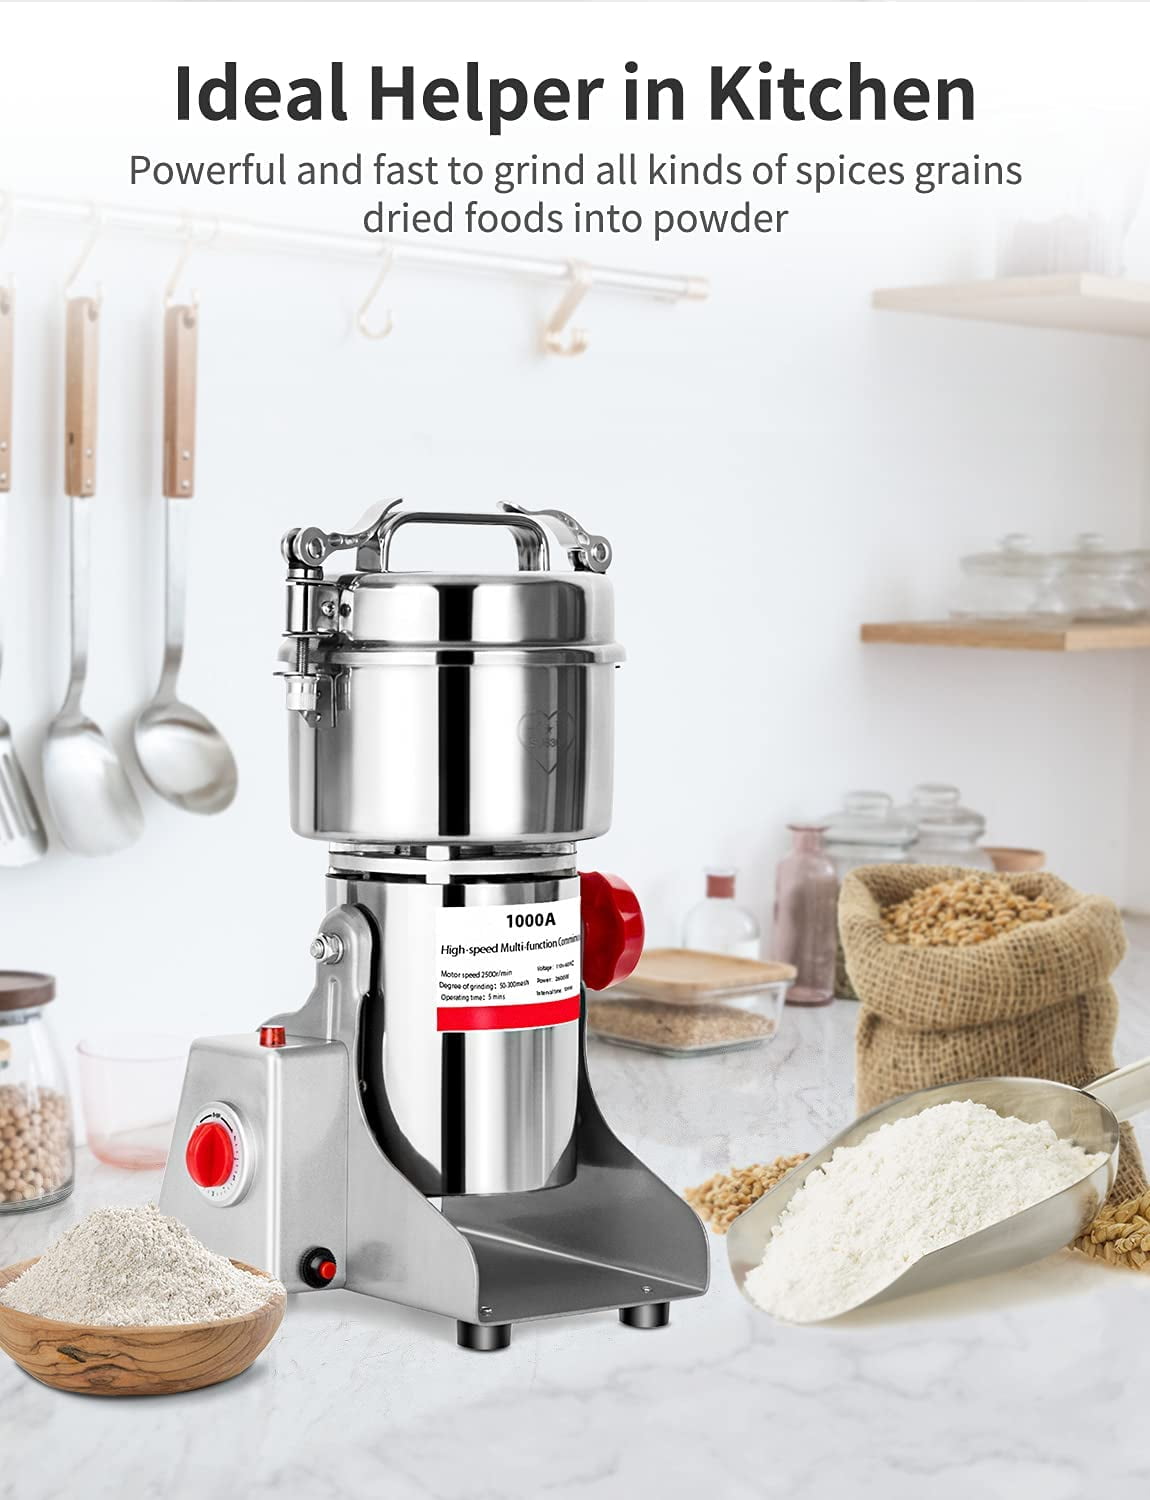 300g Grinder Electric Powder Machine 28000RPM Stainless Steel Commercial Grade Electric Grain Mill Grinder Powder Machine for Kitchen Herb Spice Grain Pepper Coffee US Plug 